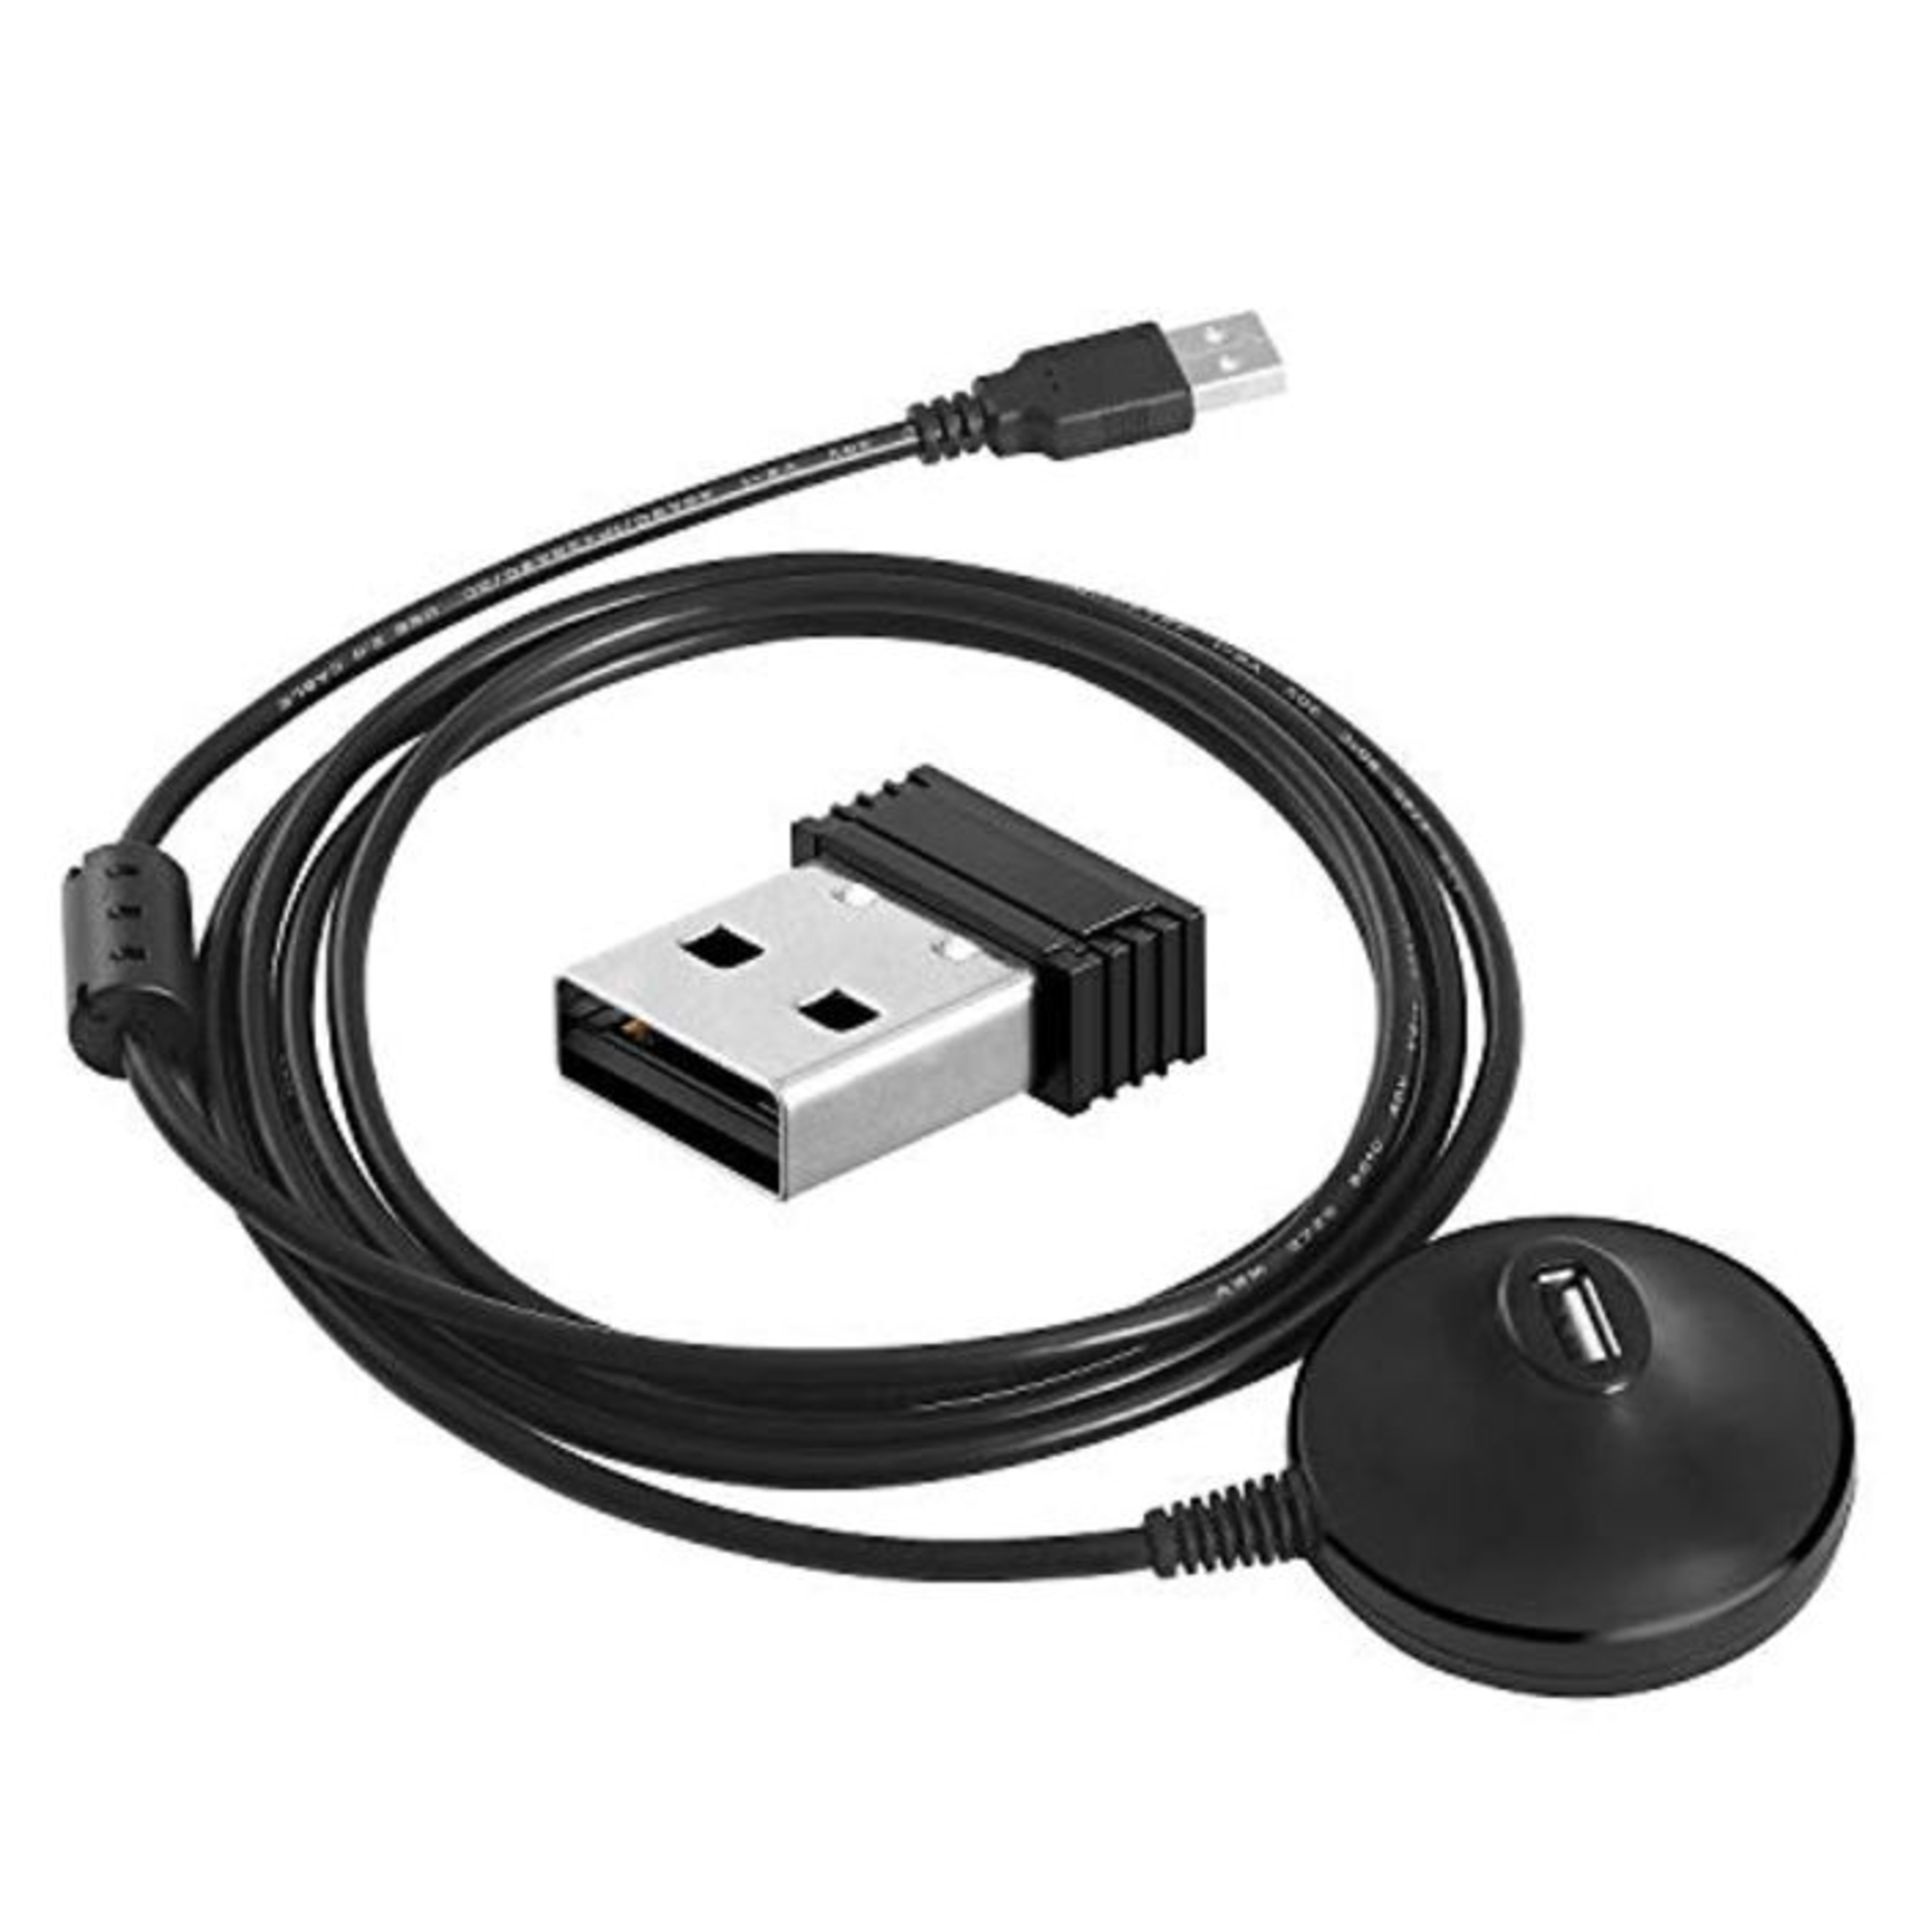 CooSpo ANT+ USB Stick Dongle with 2M/6.56FT Extension Cable, ANT+ Dongle for Zwift Gar